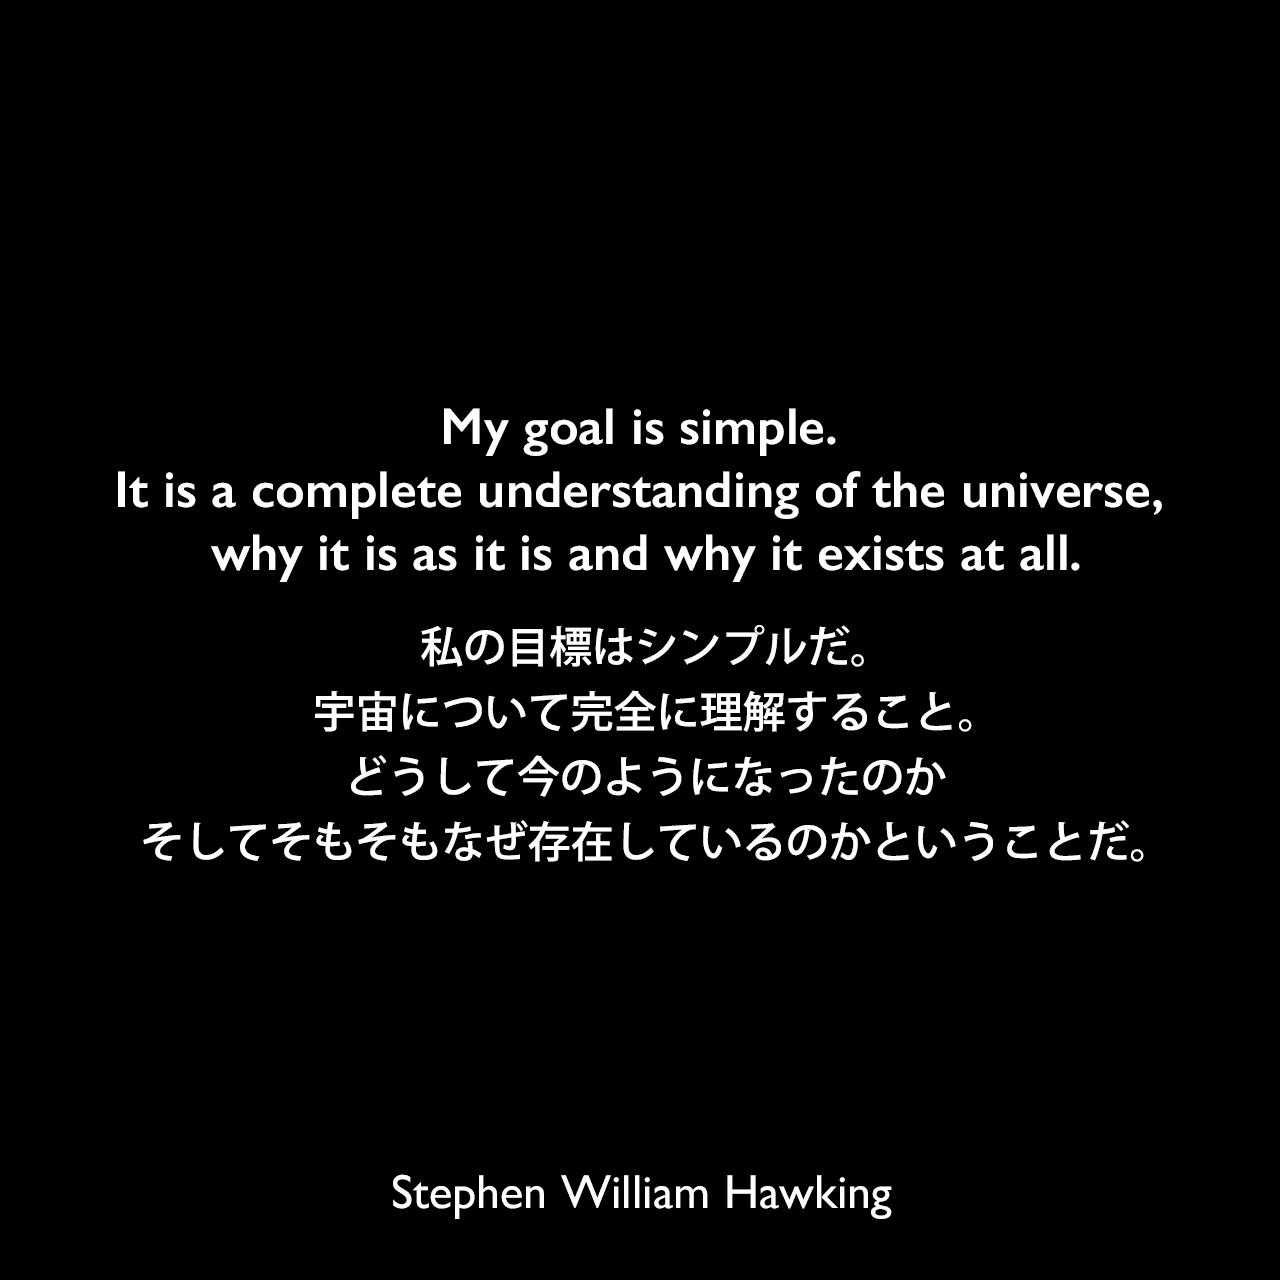 My goal is simple. It is a complete understanding of the universe, why it is as it is and why it exists at all.私の目標はシンプルだ。宇宙について完全に理解すること。どうして今のようになったのか、そしてそもそもなぜ存在しているのかということだ。- ジョン・ボスラフの本「Stephen Hawking's Universe」よりStephen William Hawking